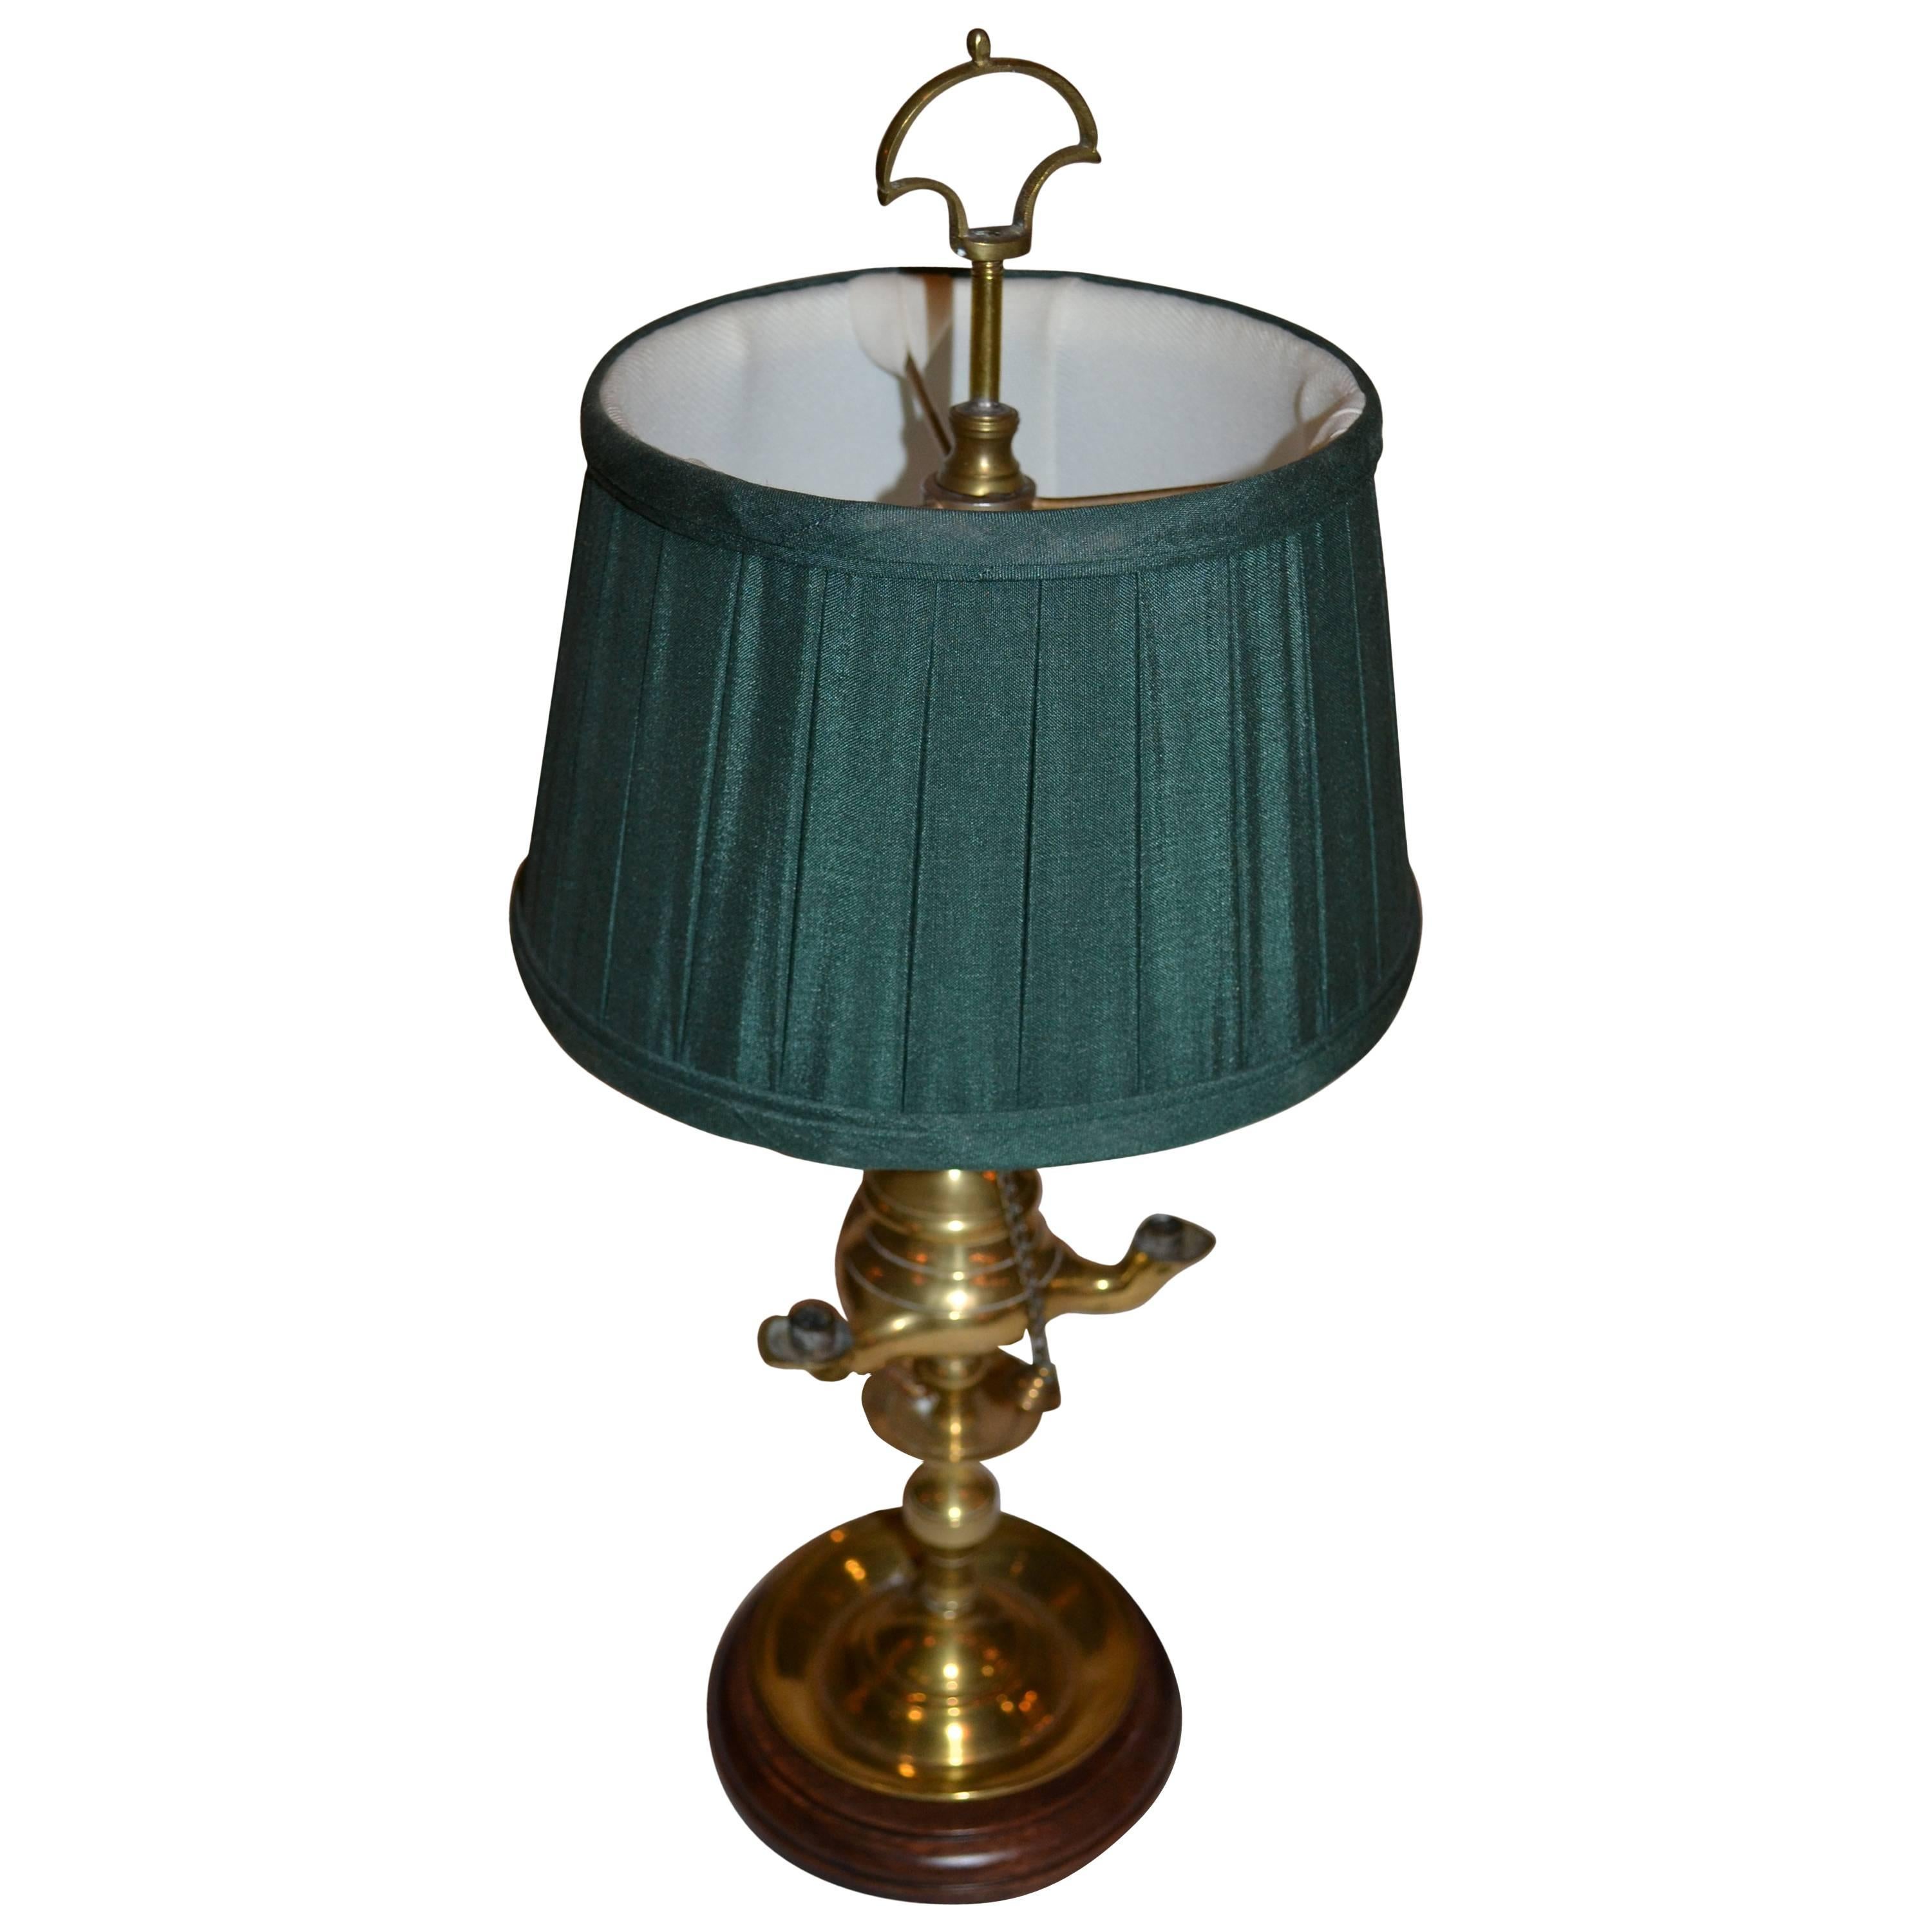 Small Brass Gas Lamp Converted to Electricy